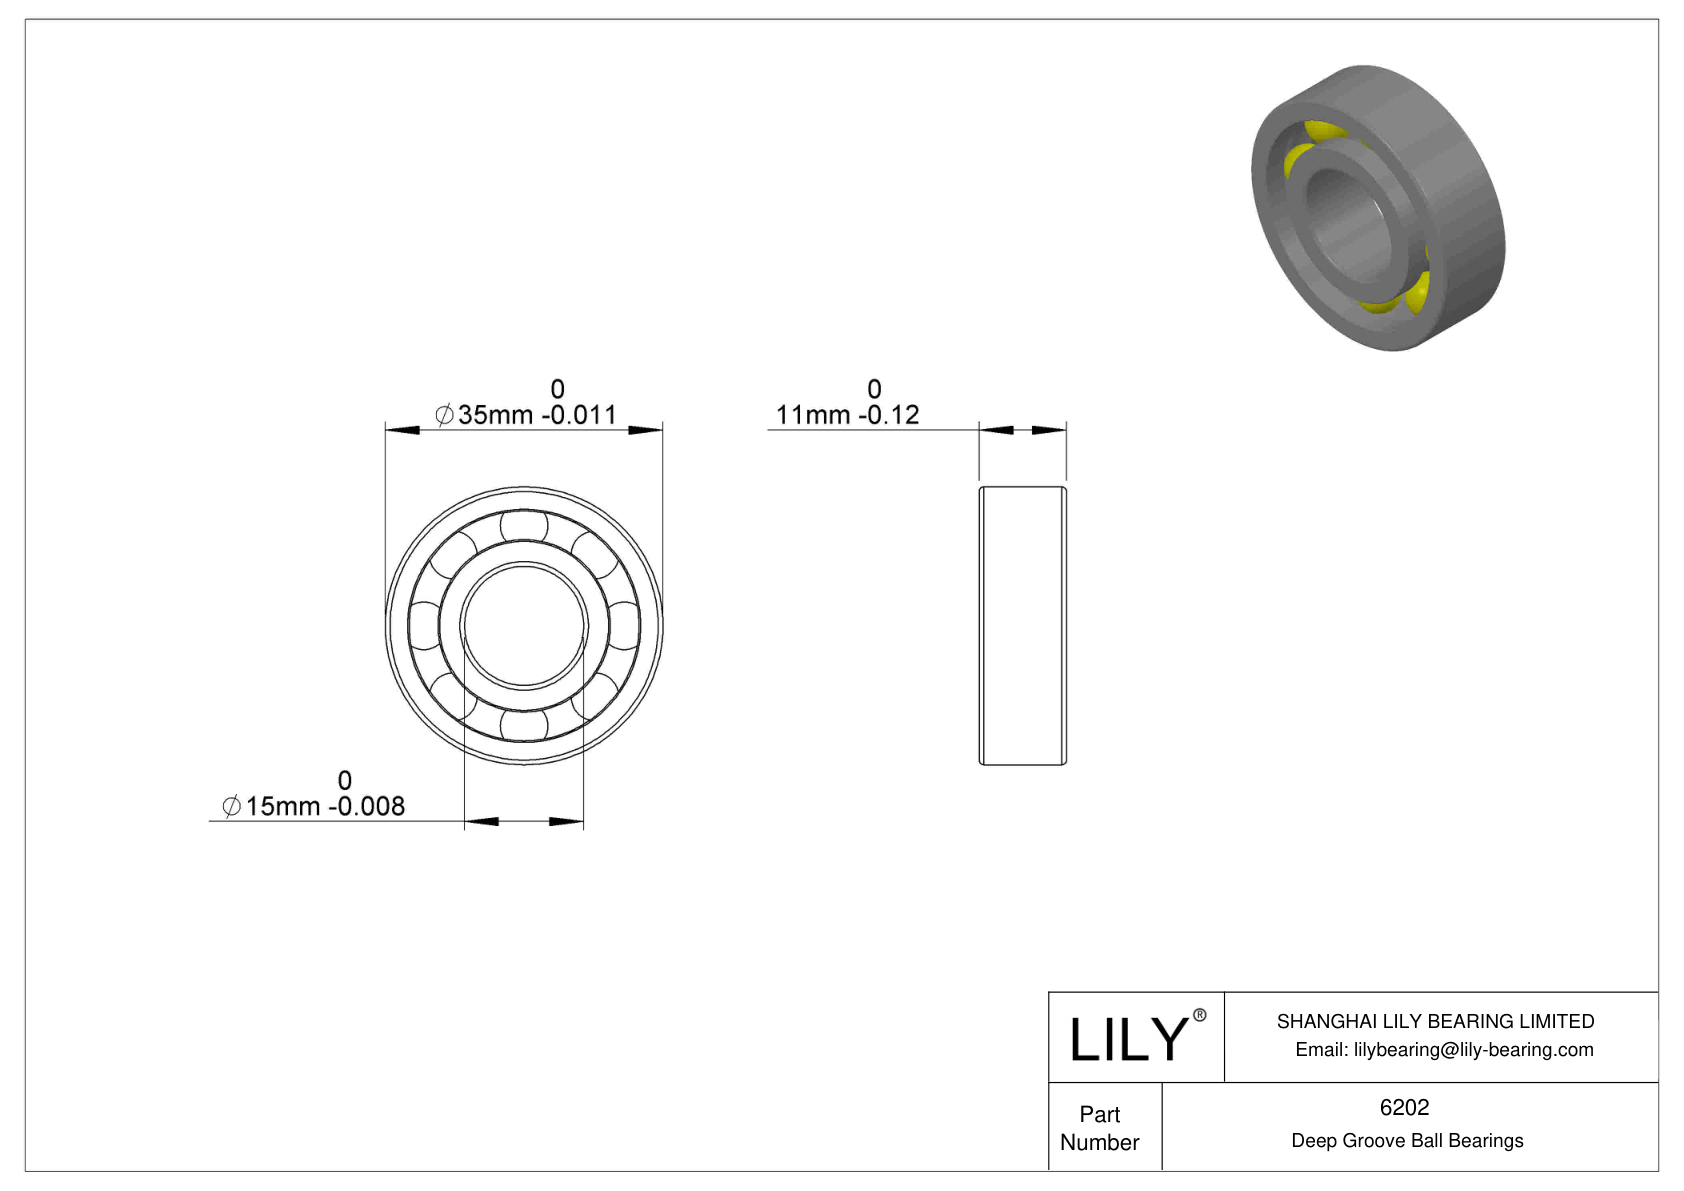 LILY-PU620255-15C2L12M10 Polyurethane Coated Bearing With Screw cad drawing